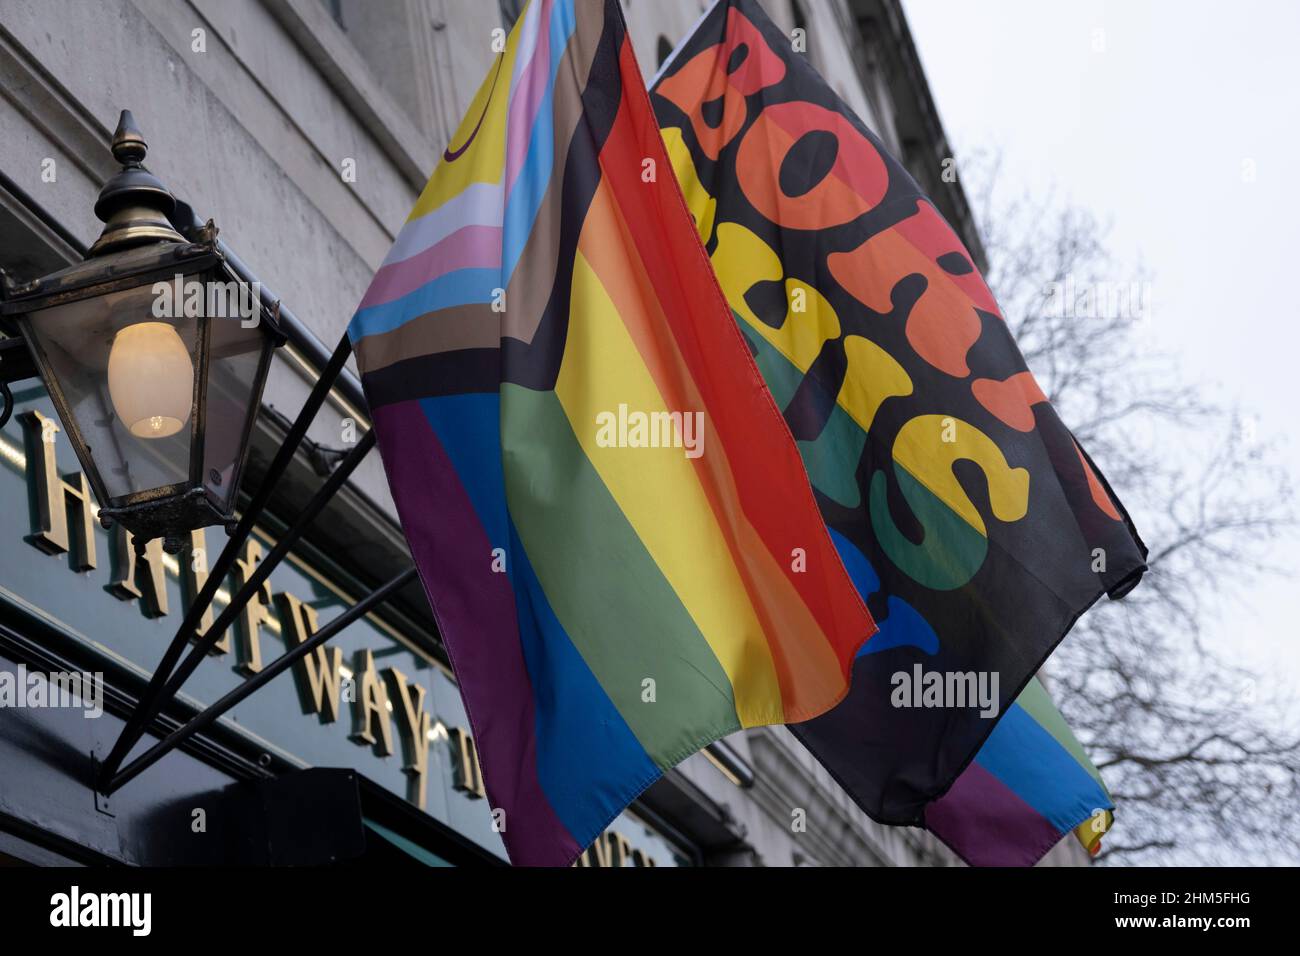 Intersex Progress Pride flags outside a pub in on 22nd January 2022 in London, United Kingdom. The flag includes stripes to represent LGBTQ+ communities, with colors from the Transgender Pride Flag, alongside the and circle of the Intersex flag. Stock Photo